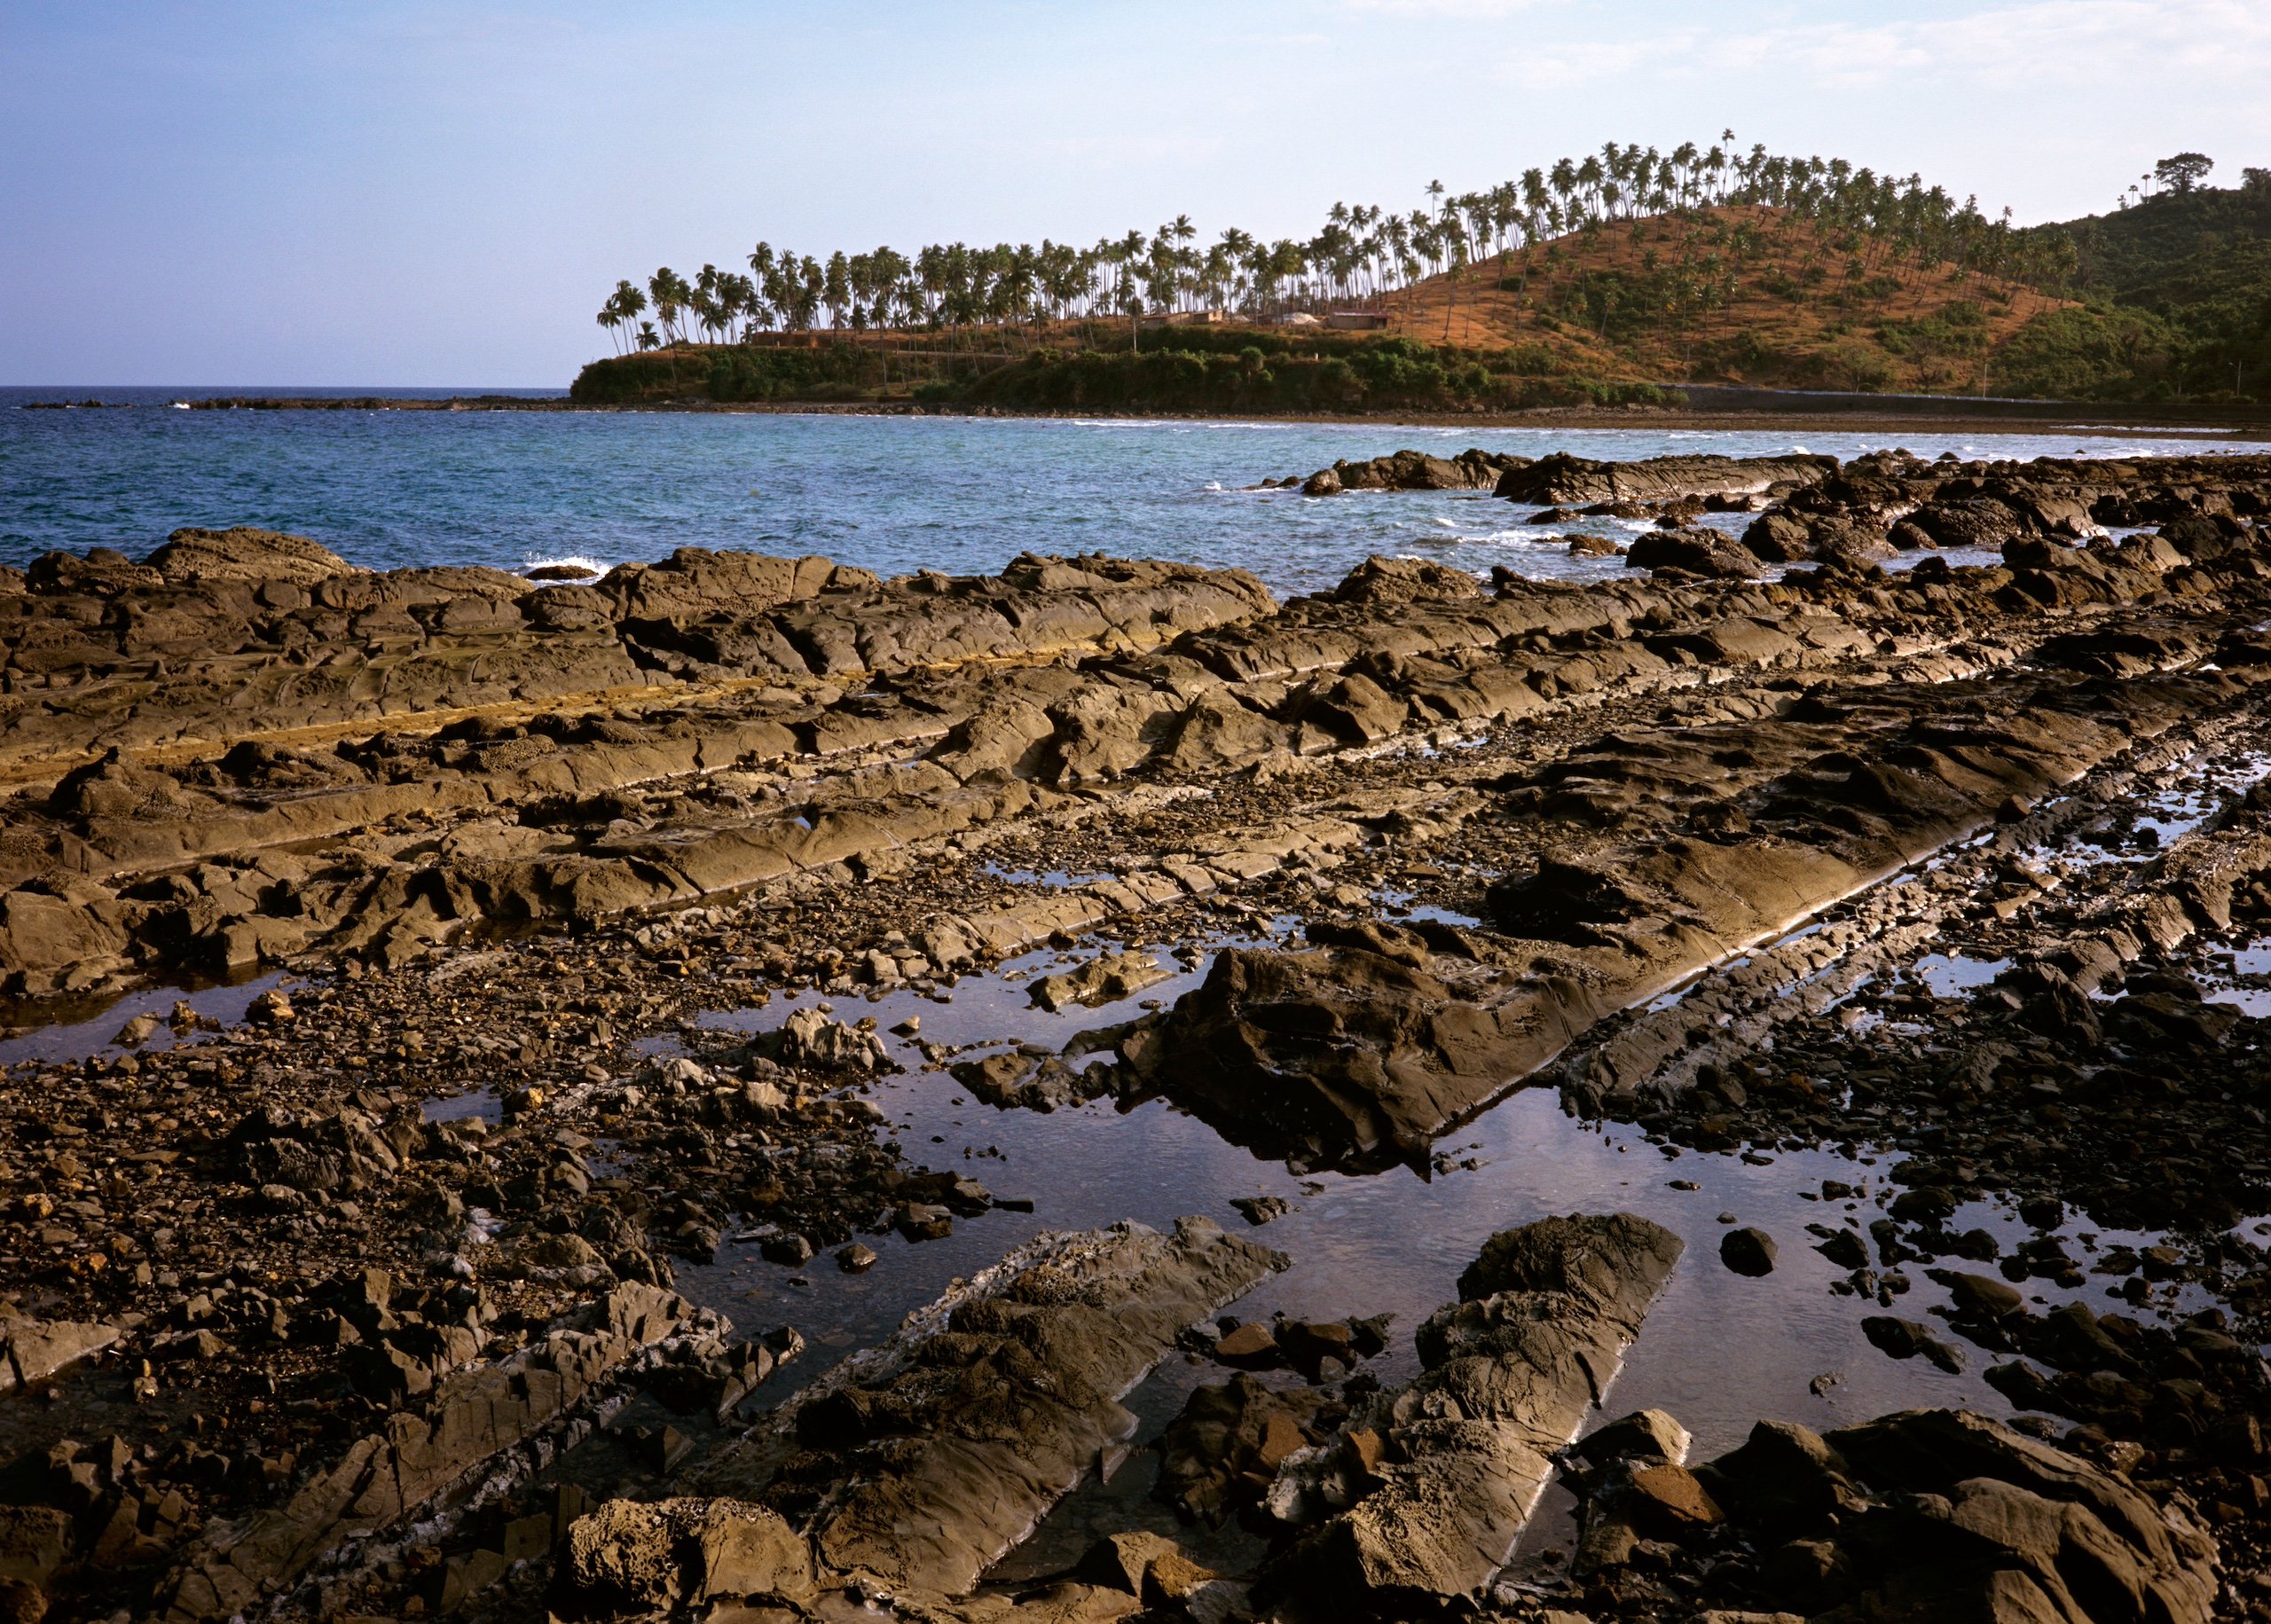 A rocky beach with lightly forested hillside in the background